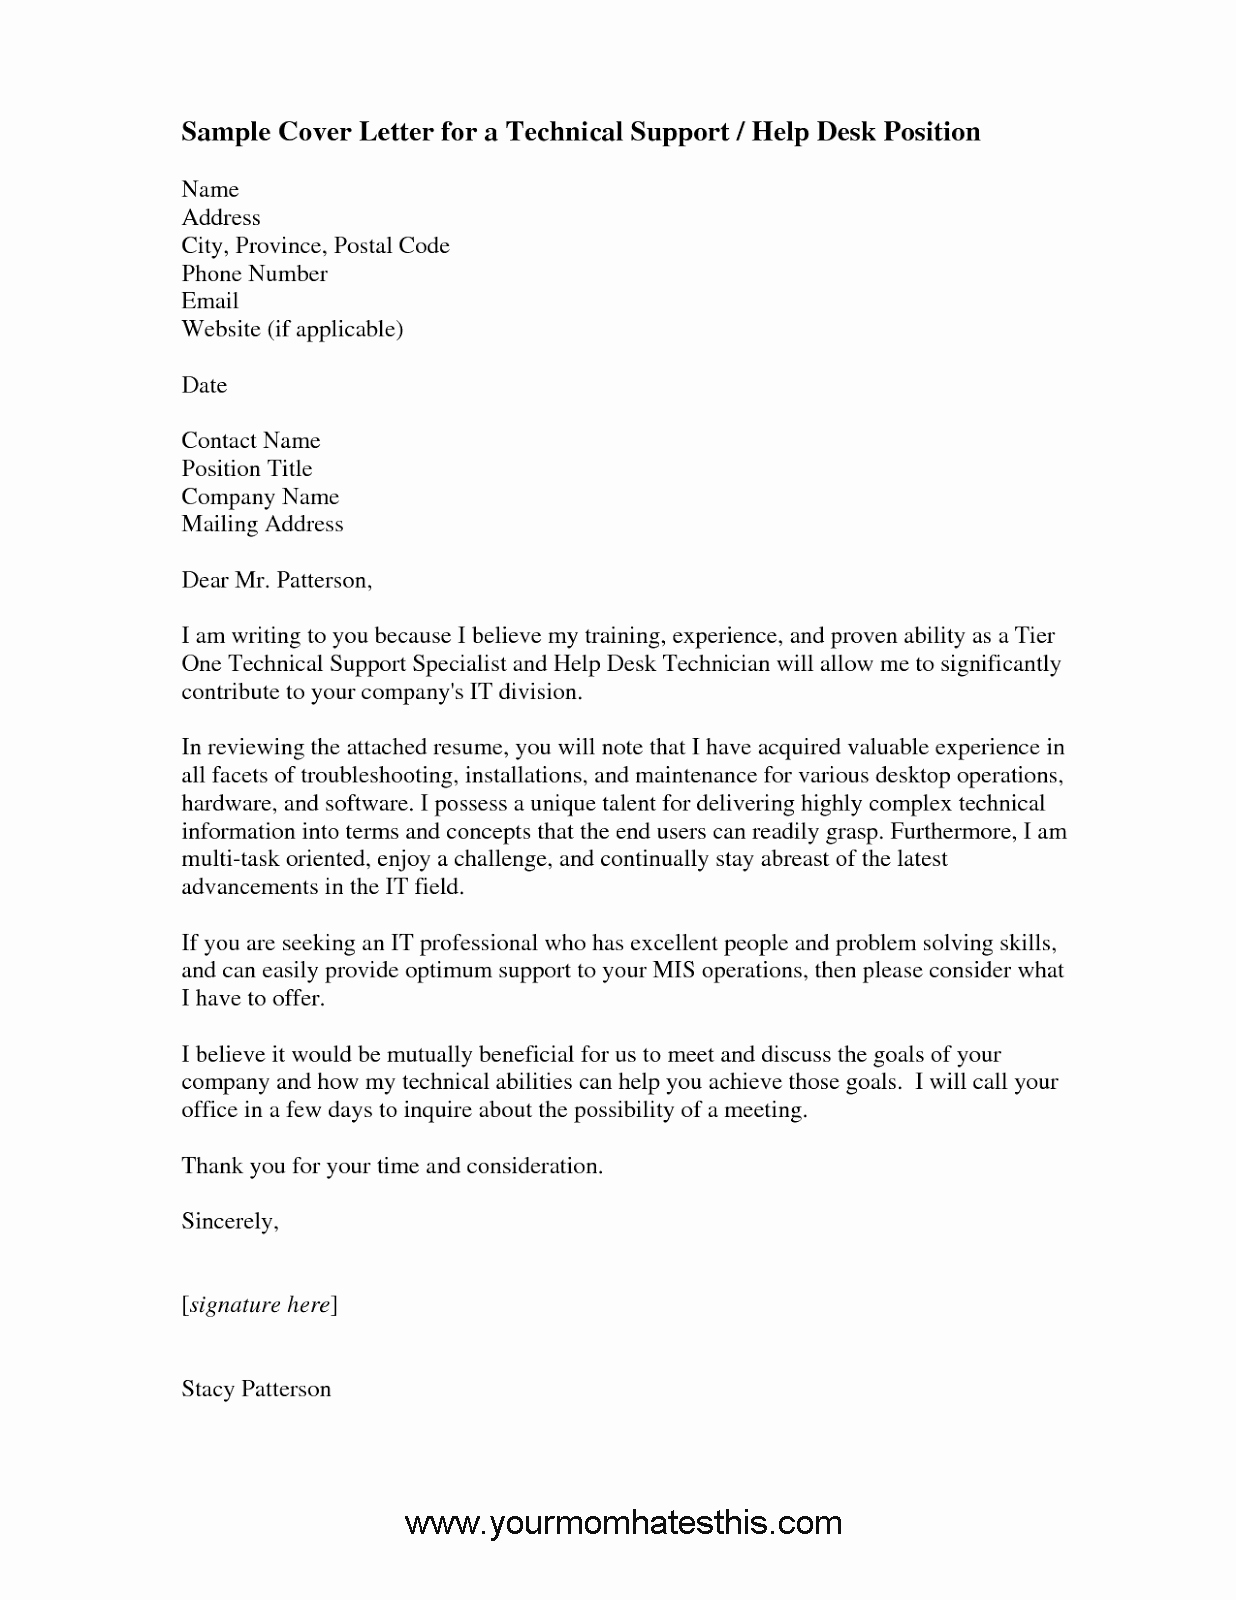 Letter Of Support format Best Of Cover Letter Samples Download Free Cover Letter Templates